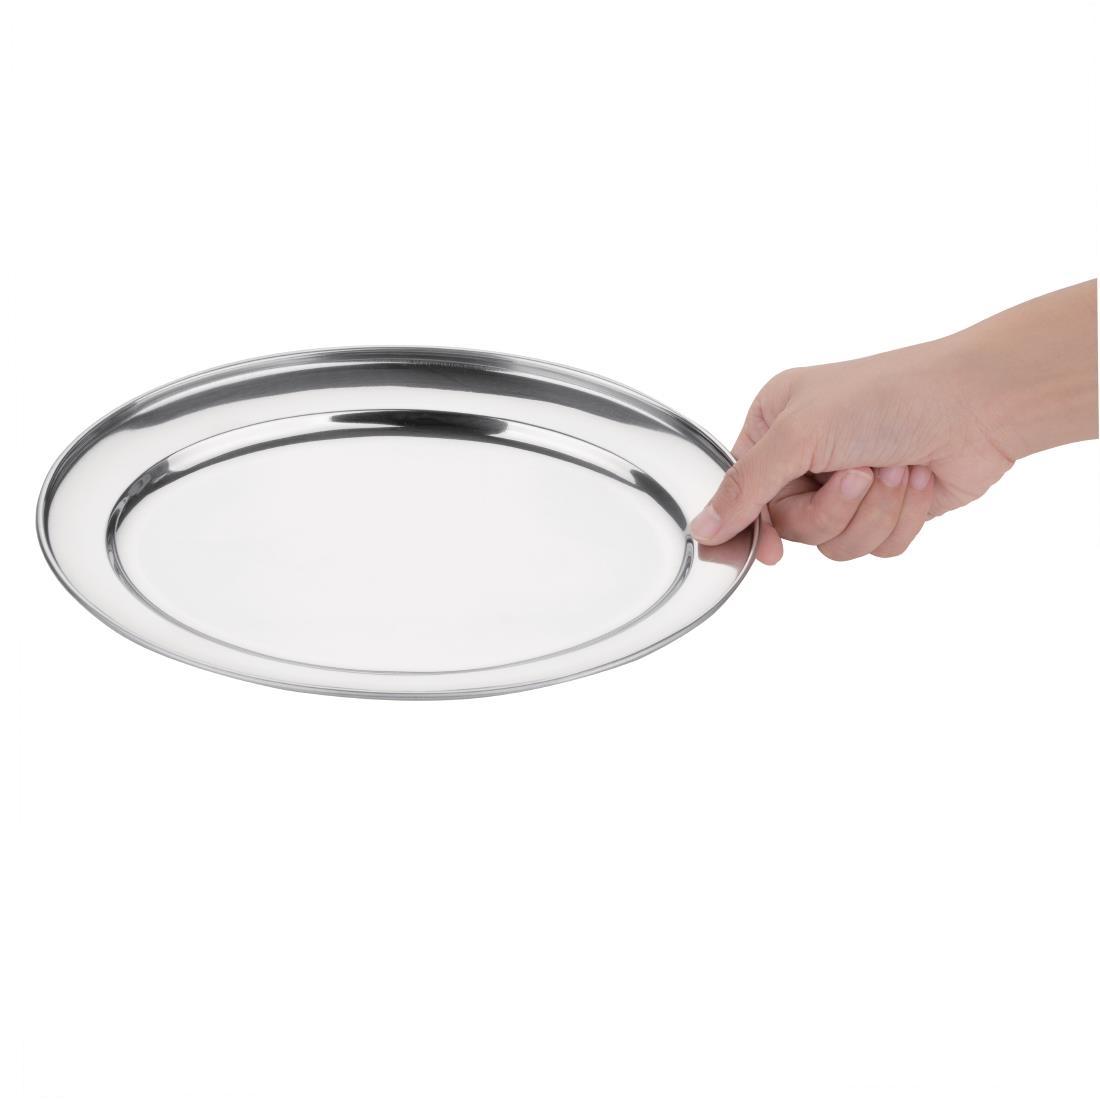 Olympia Stainless Steel Oval Serving Tray 300mm - K363  - 7